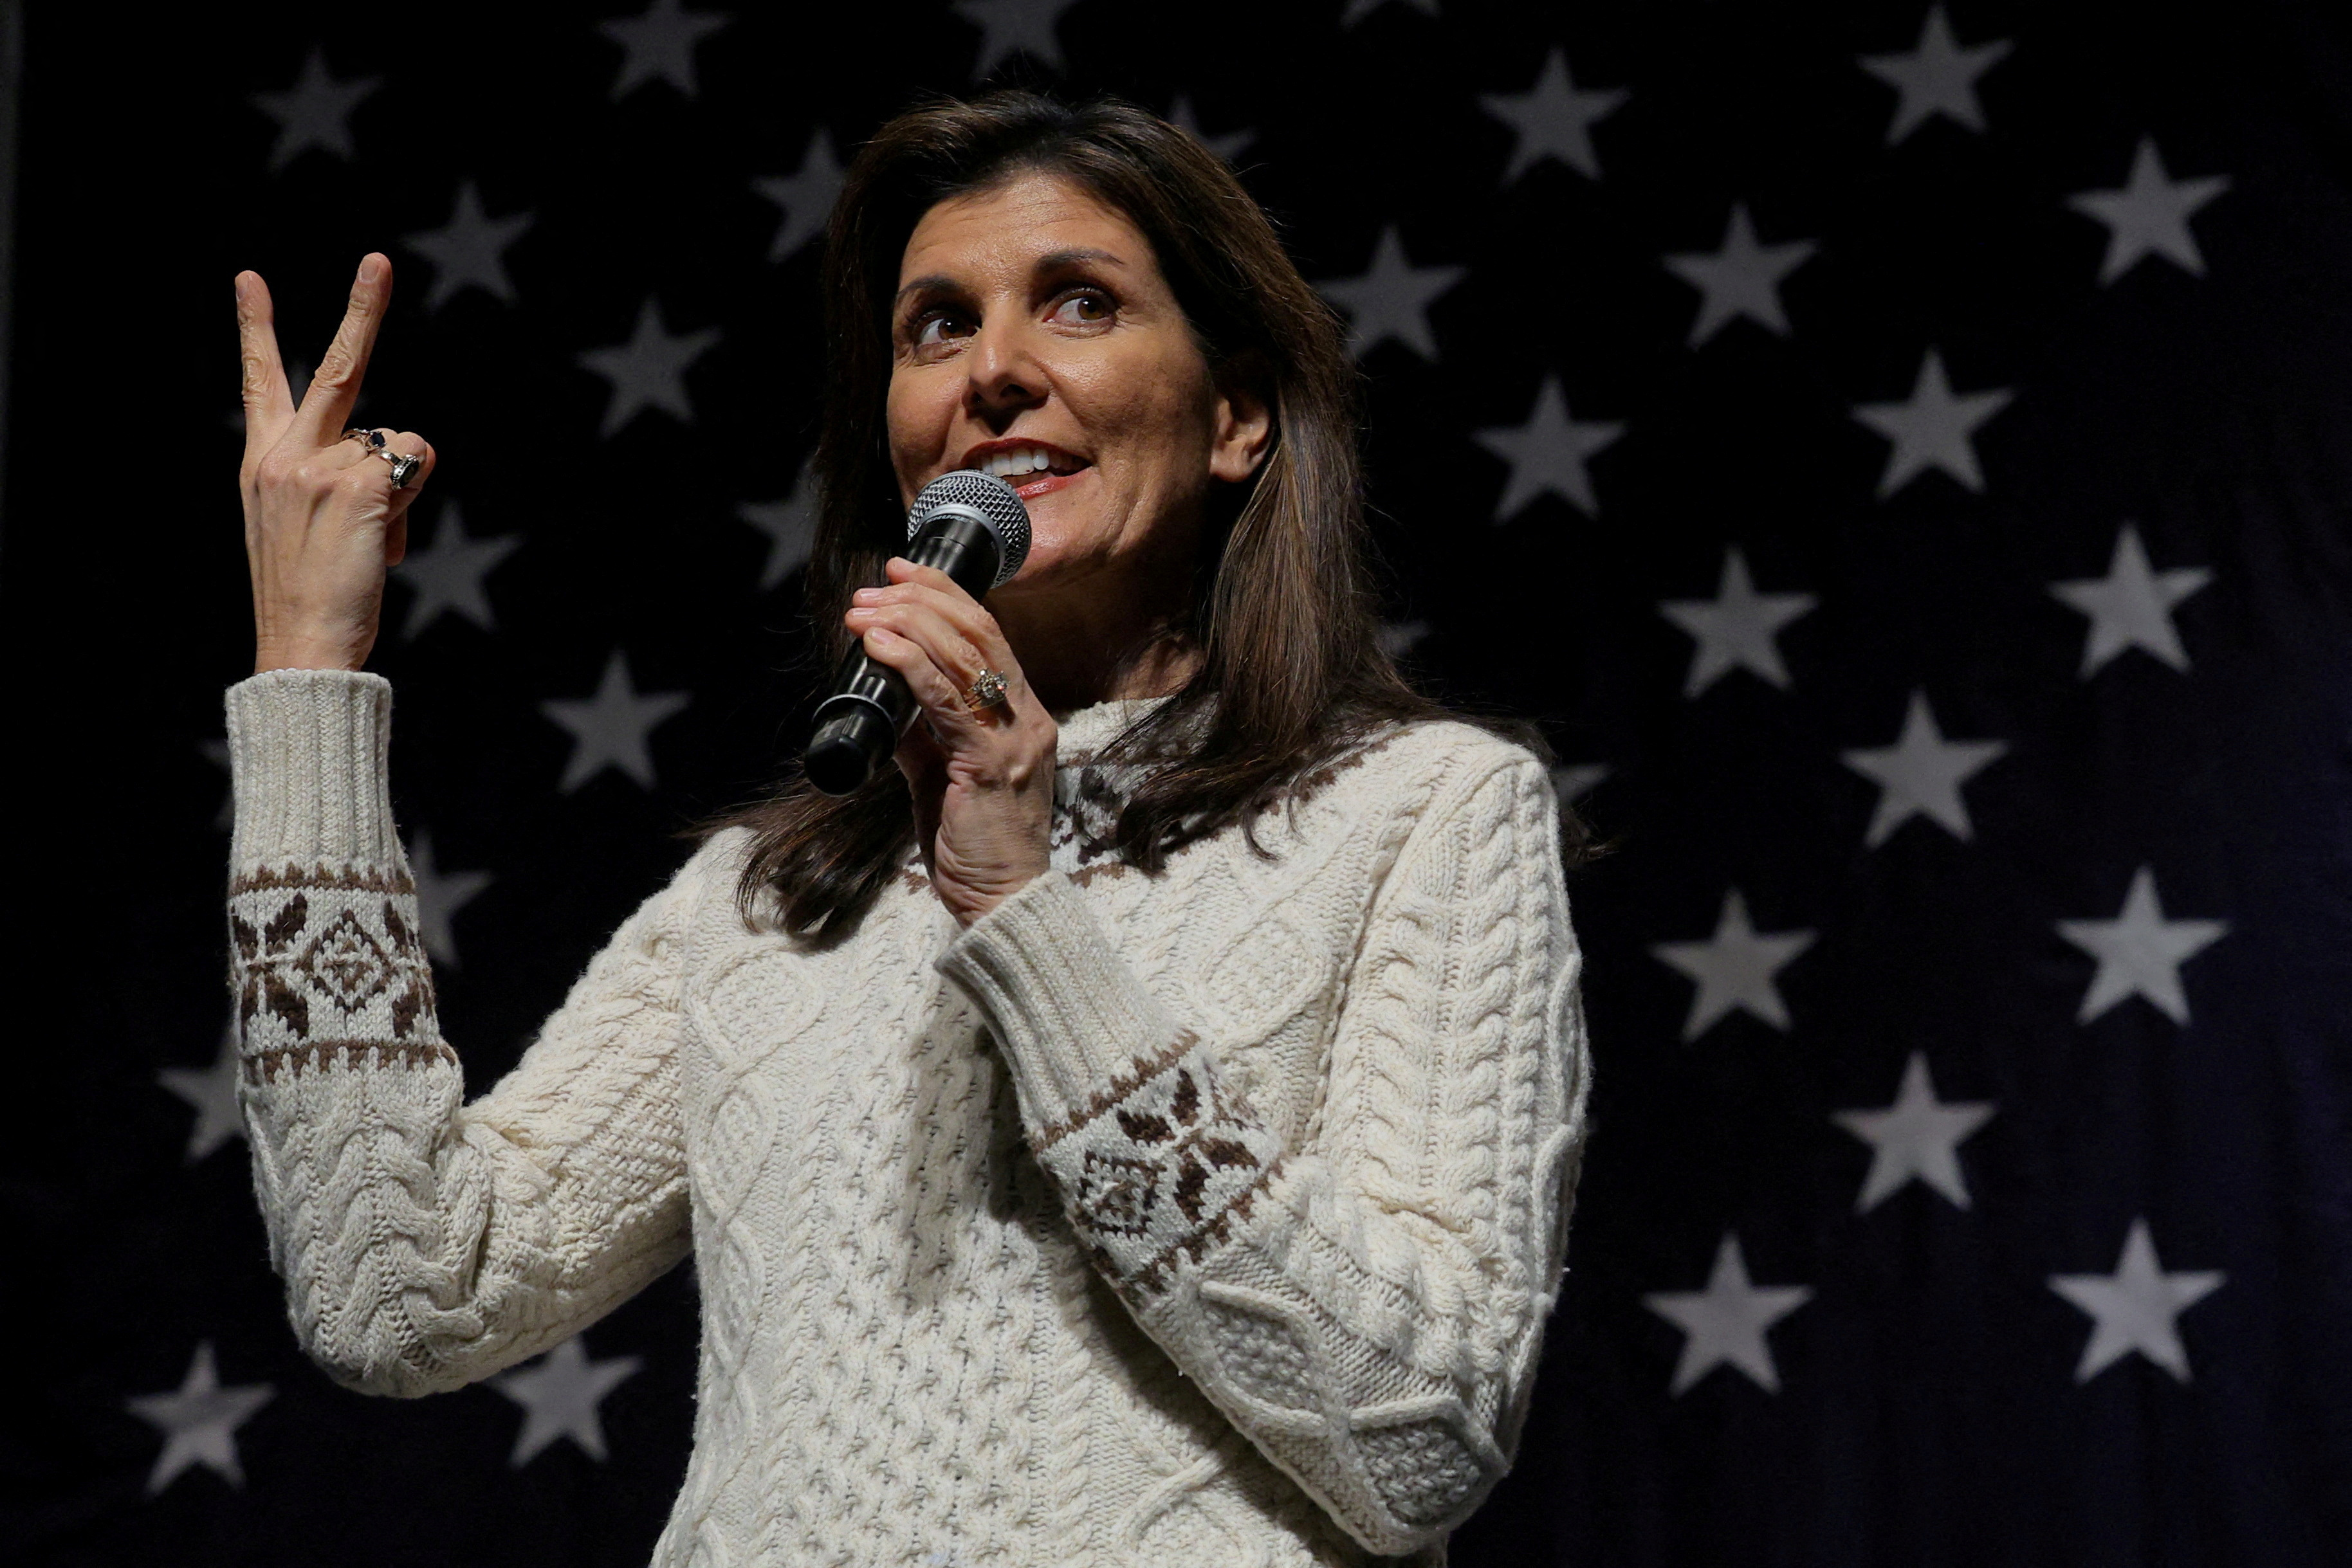 Republican presidential candidate Haley campaigns in Exeter